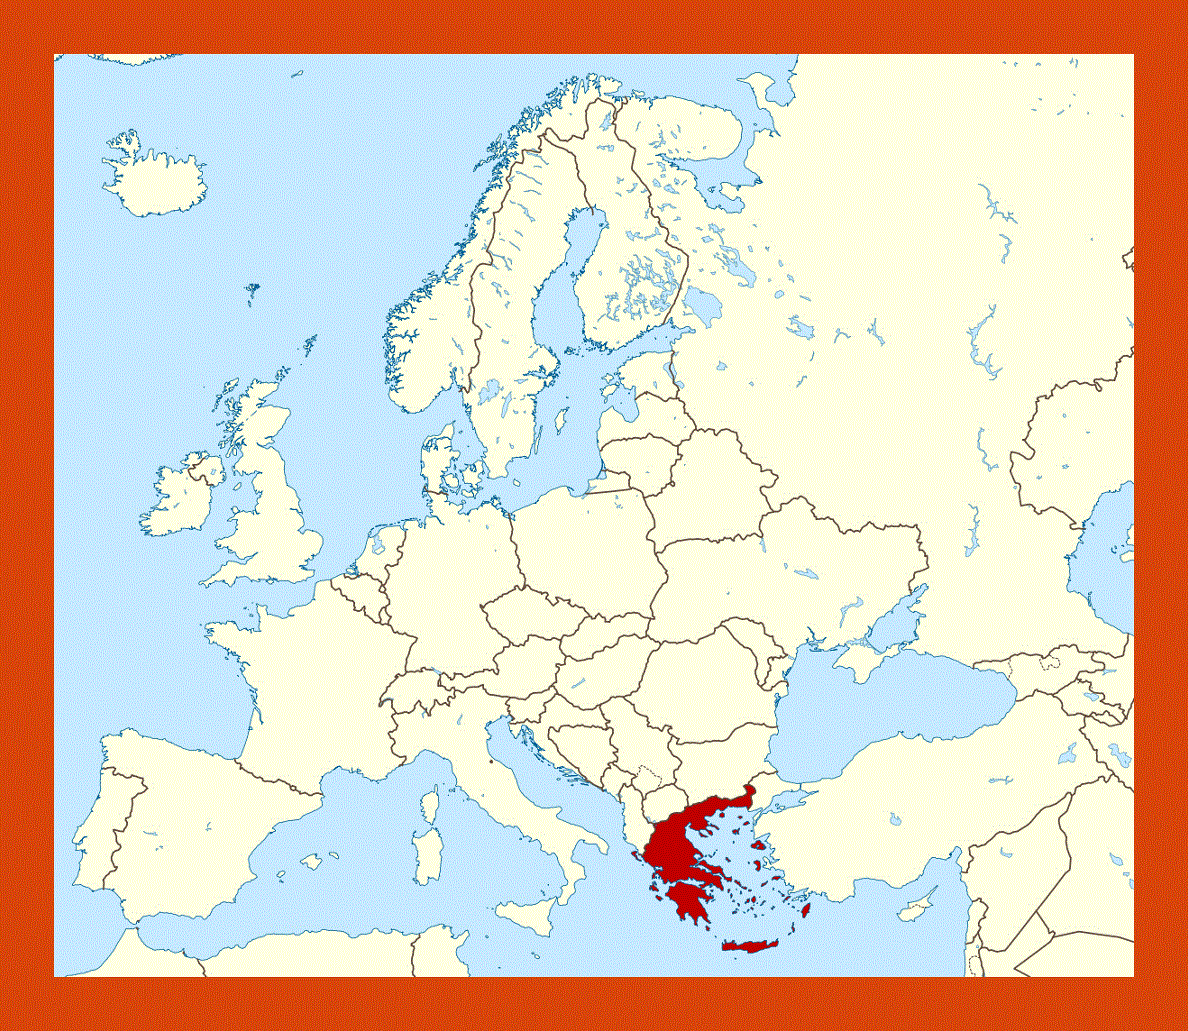 Location map of Greece